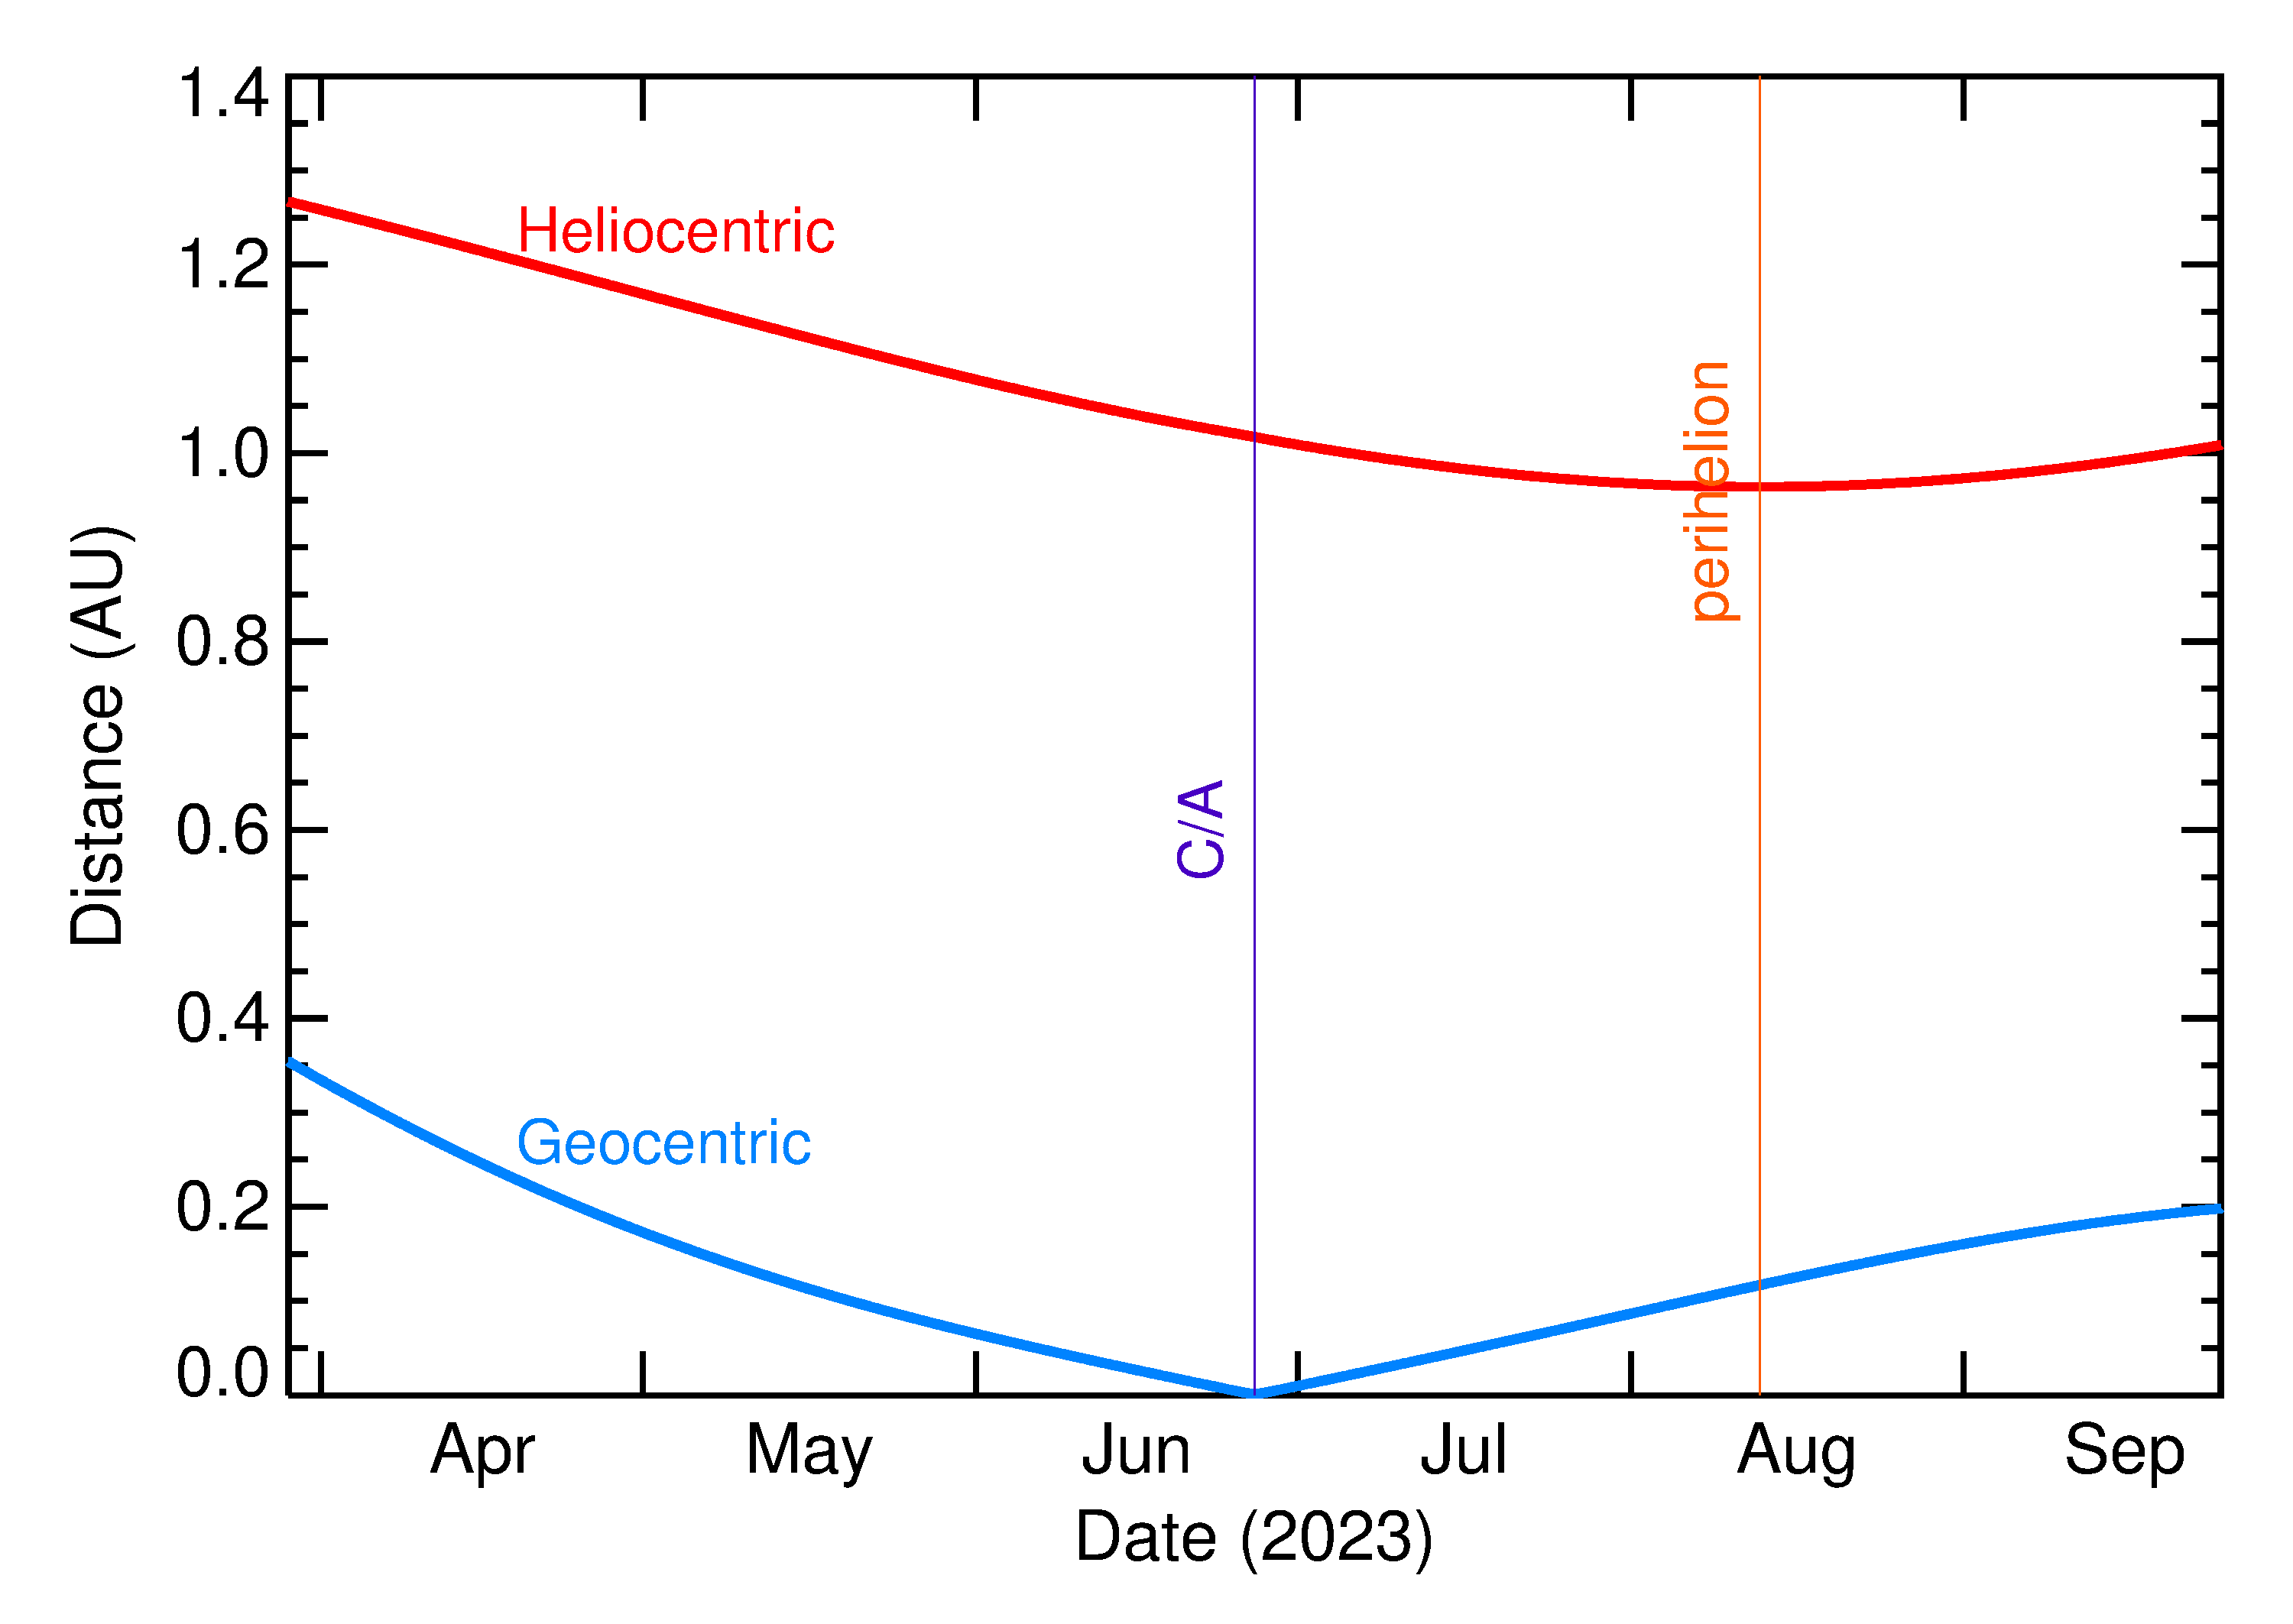 Heliocentric and Geocentric Distances of 2023 MU2 in the months around closest approach